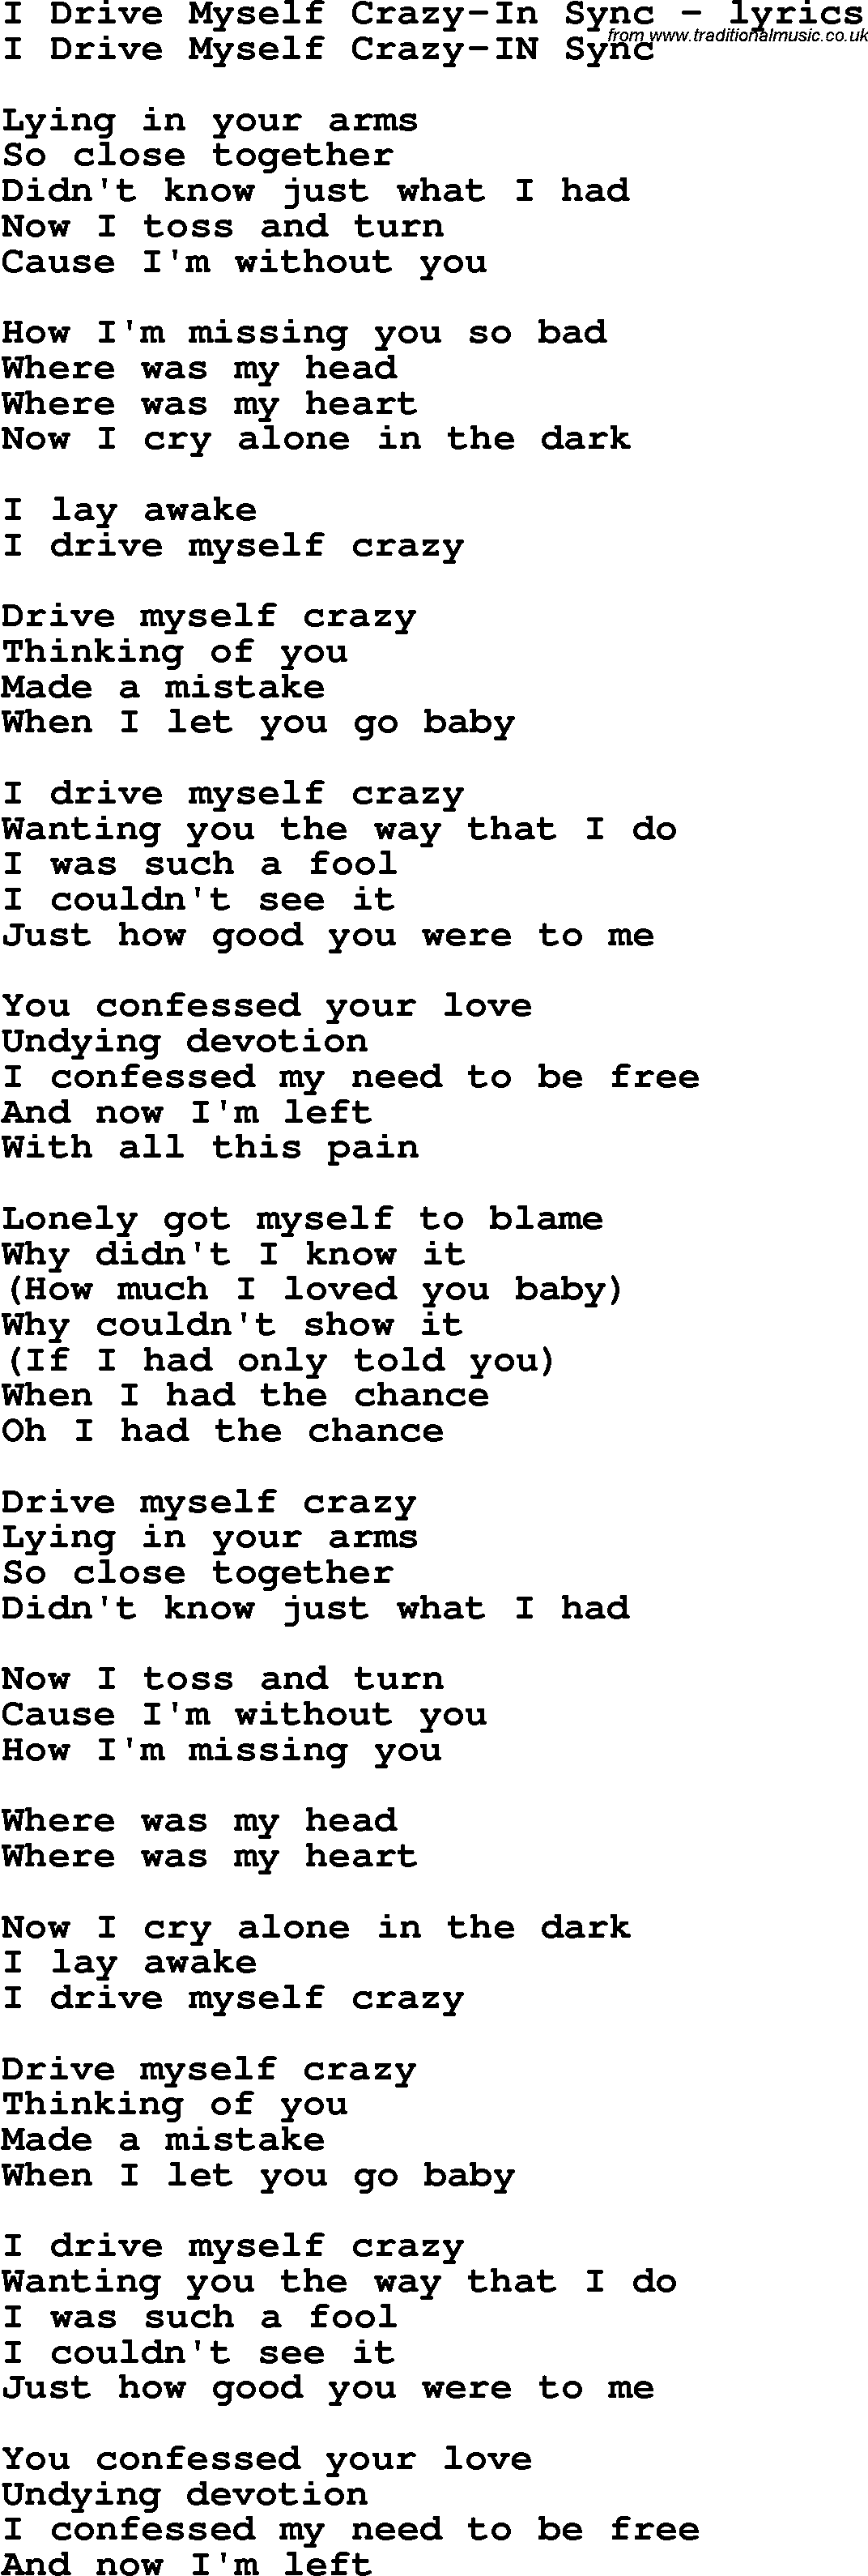 Love Song Lyrics for: I Drive Myself Crazy-In Sync